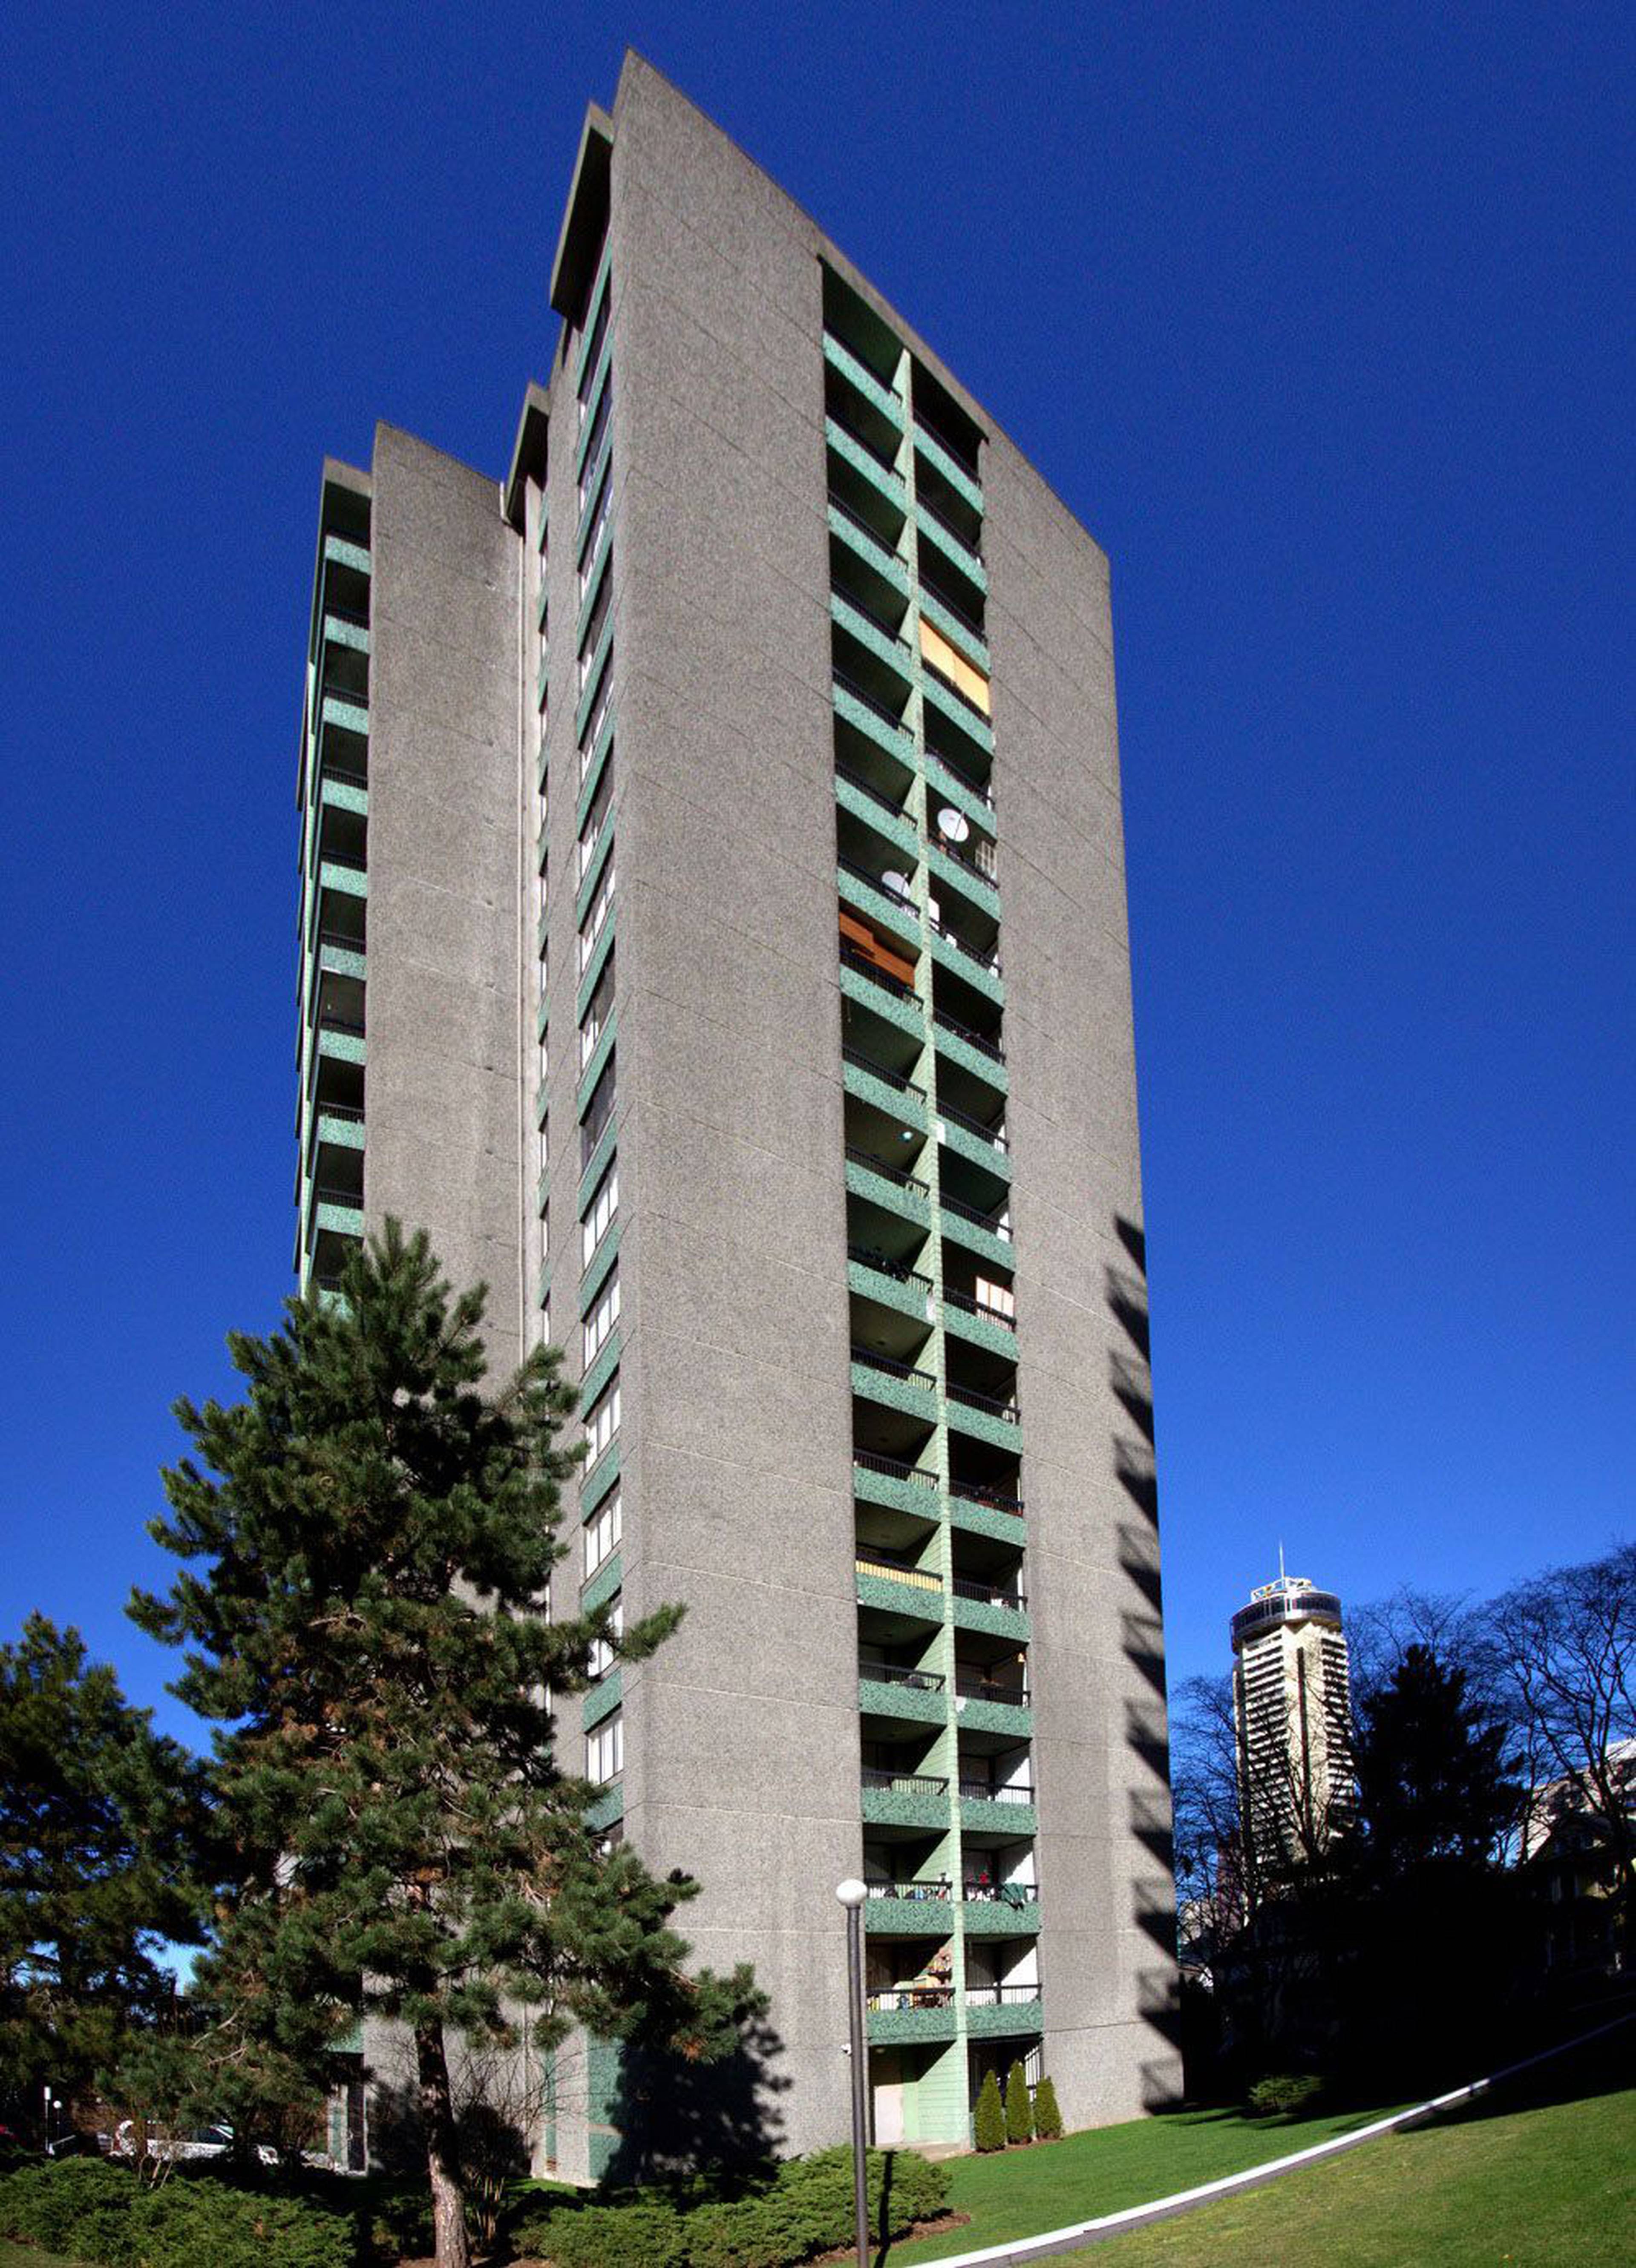 Barclay Towers Apartment Building